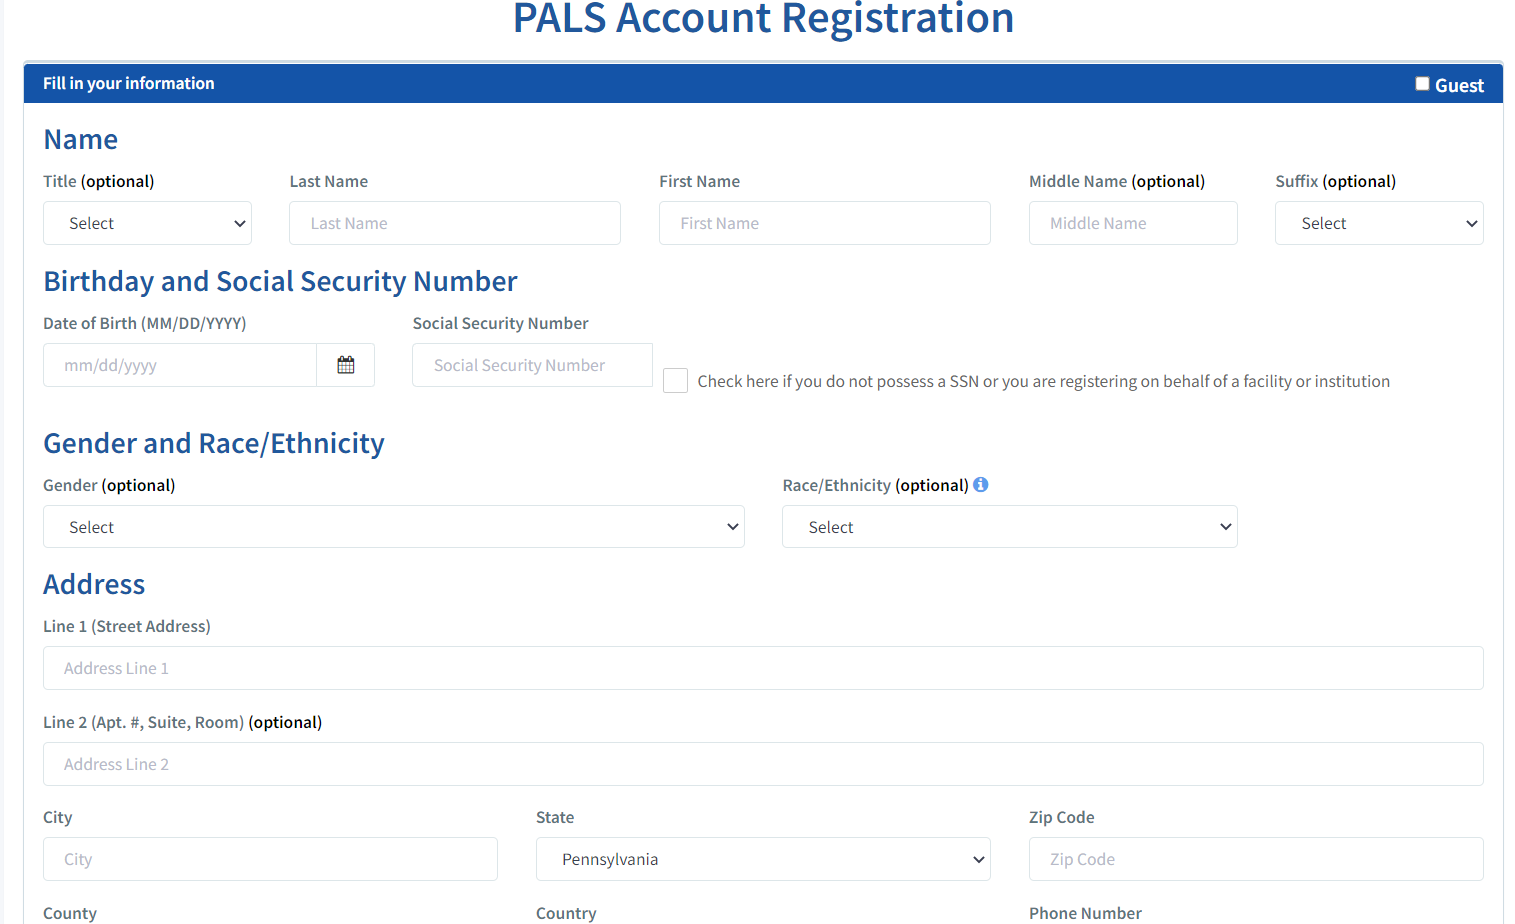 PALS website showing the account registration options.